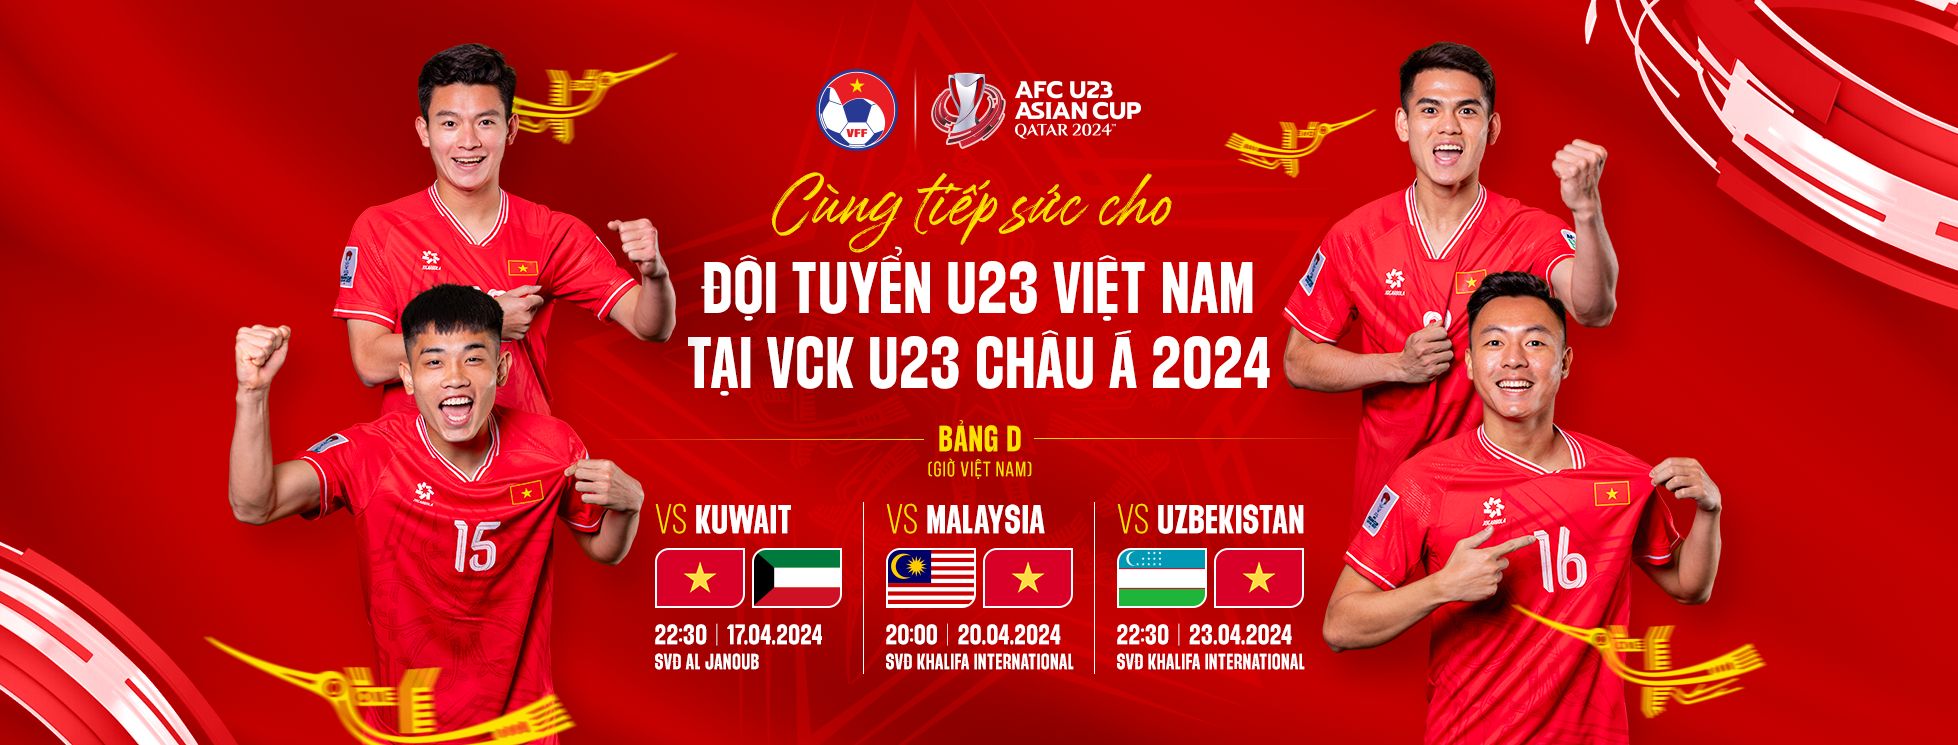 cover-afcu23asiancup2024-1712028335.png